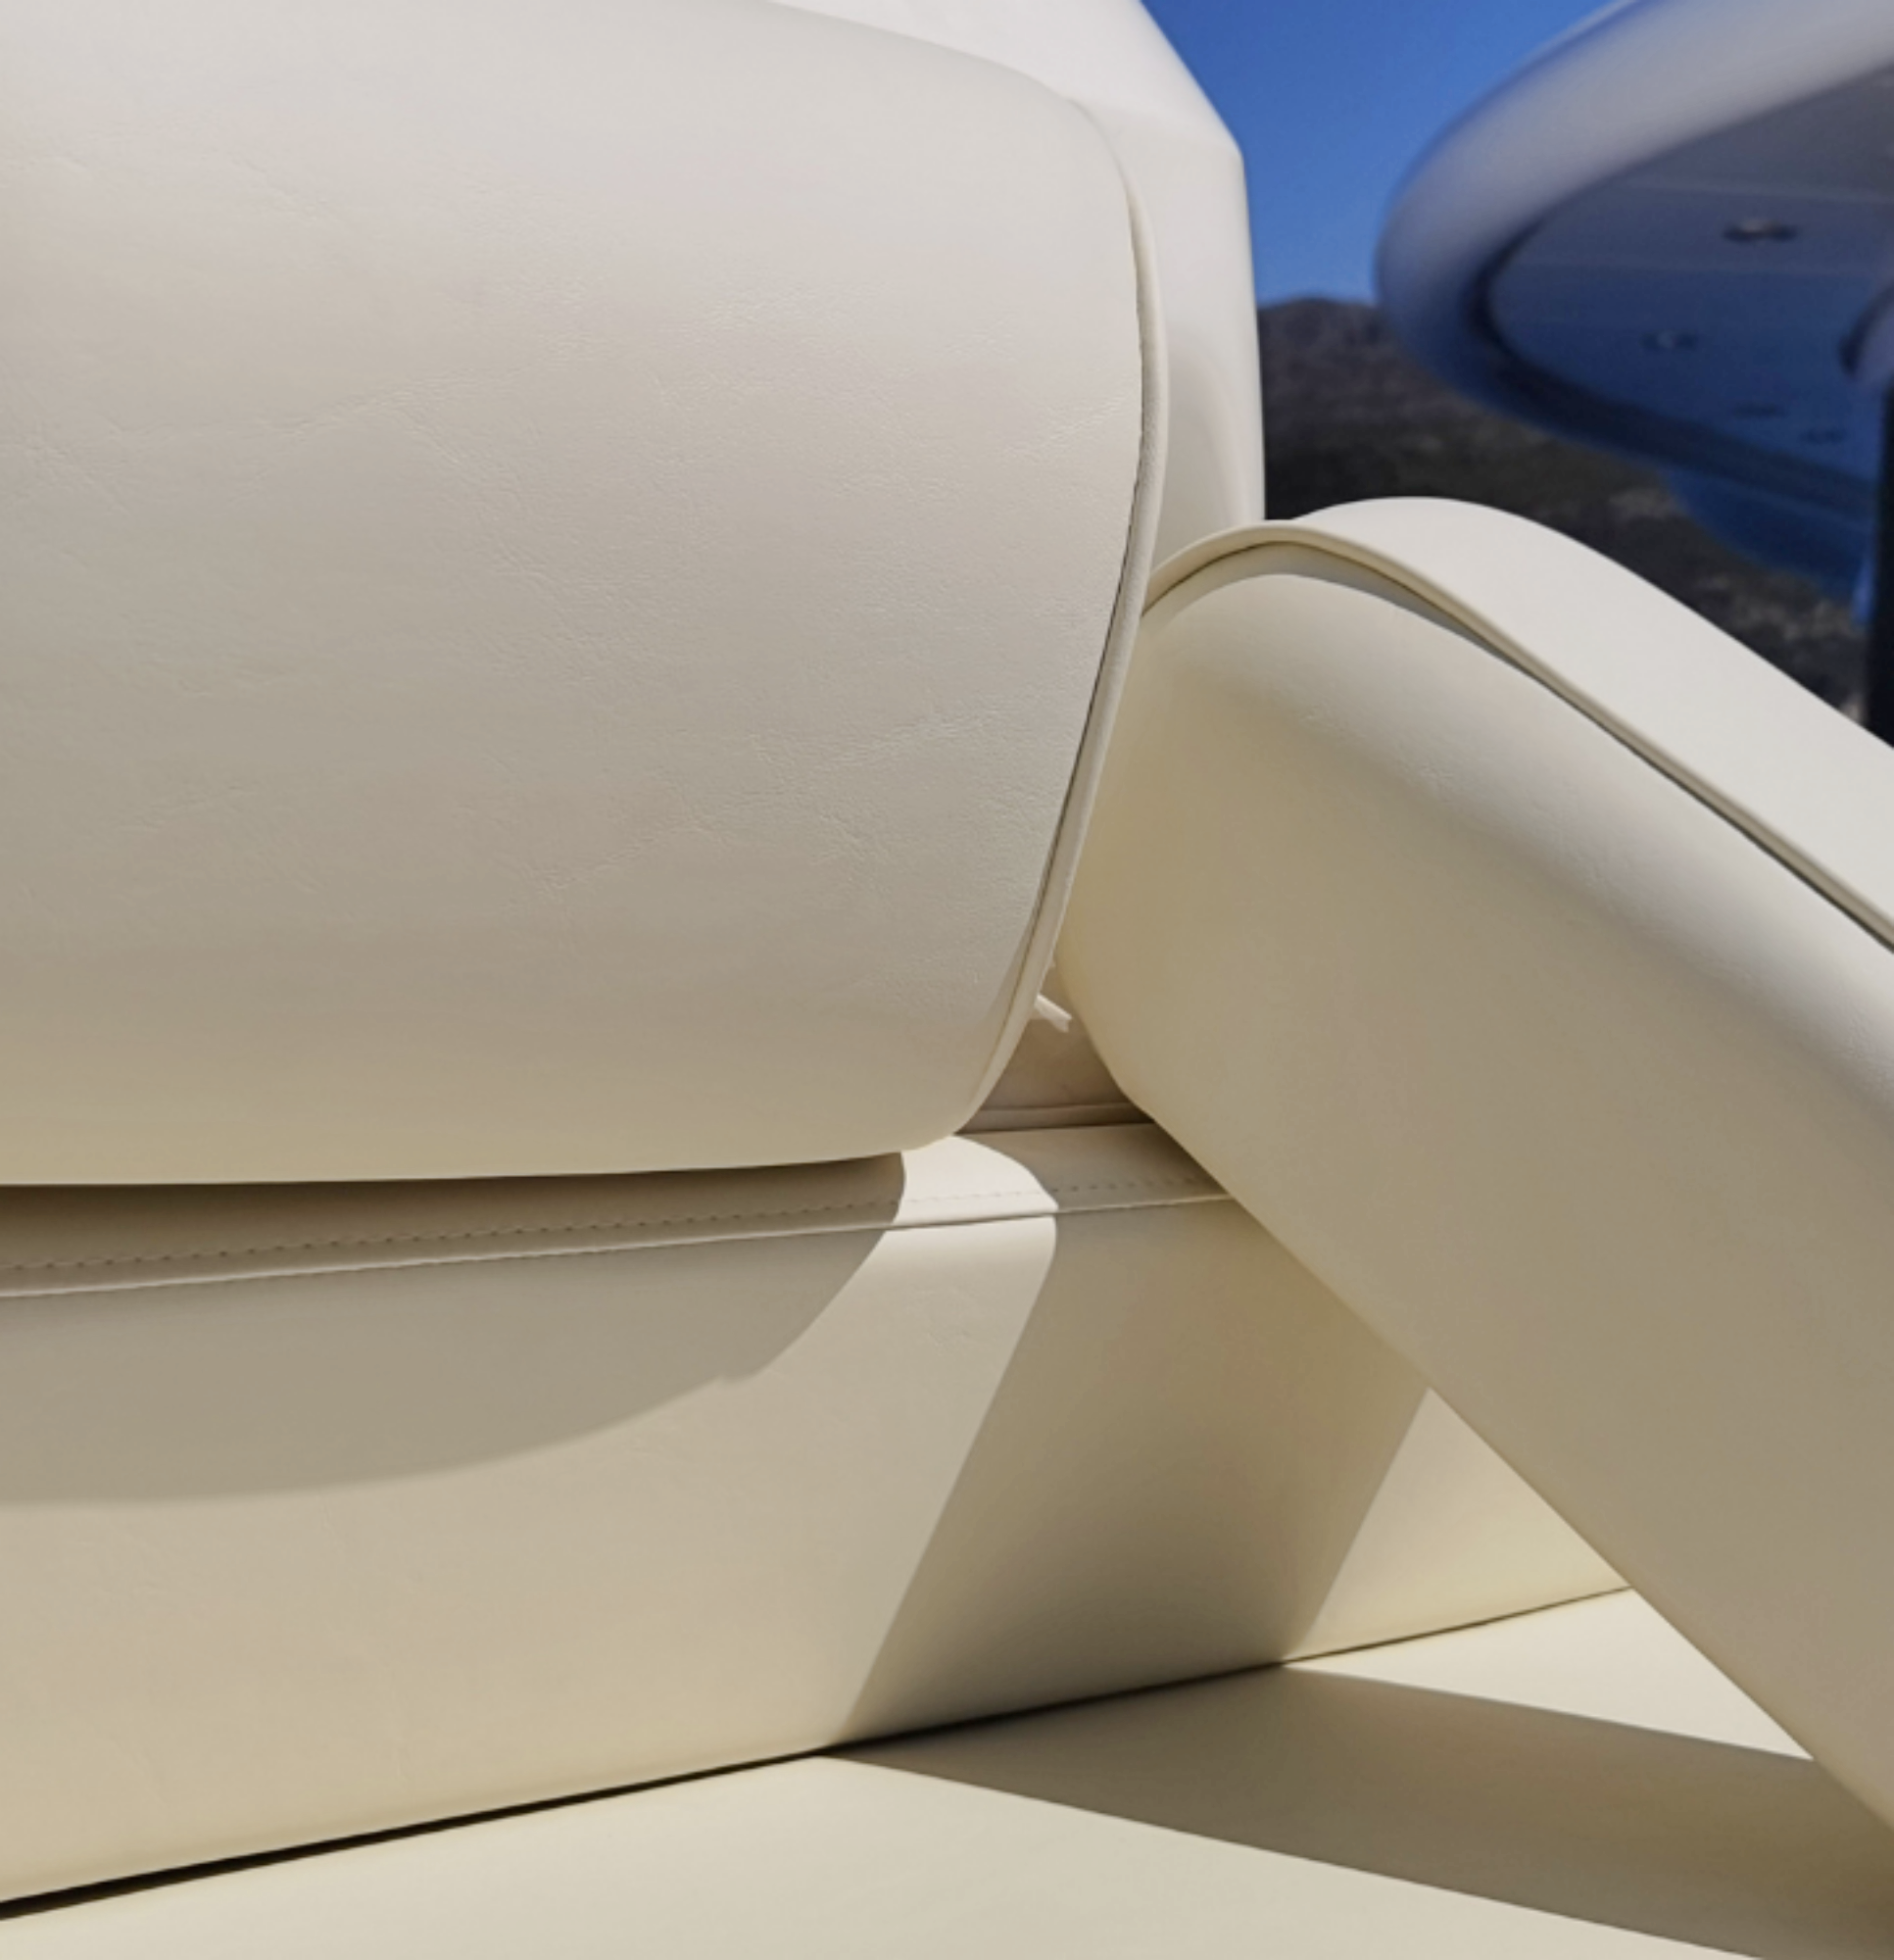 Frey used a gentle ivory, marine fabric by Spradling, for a timeless look in the restyling of Williams superyacht jet tender.